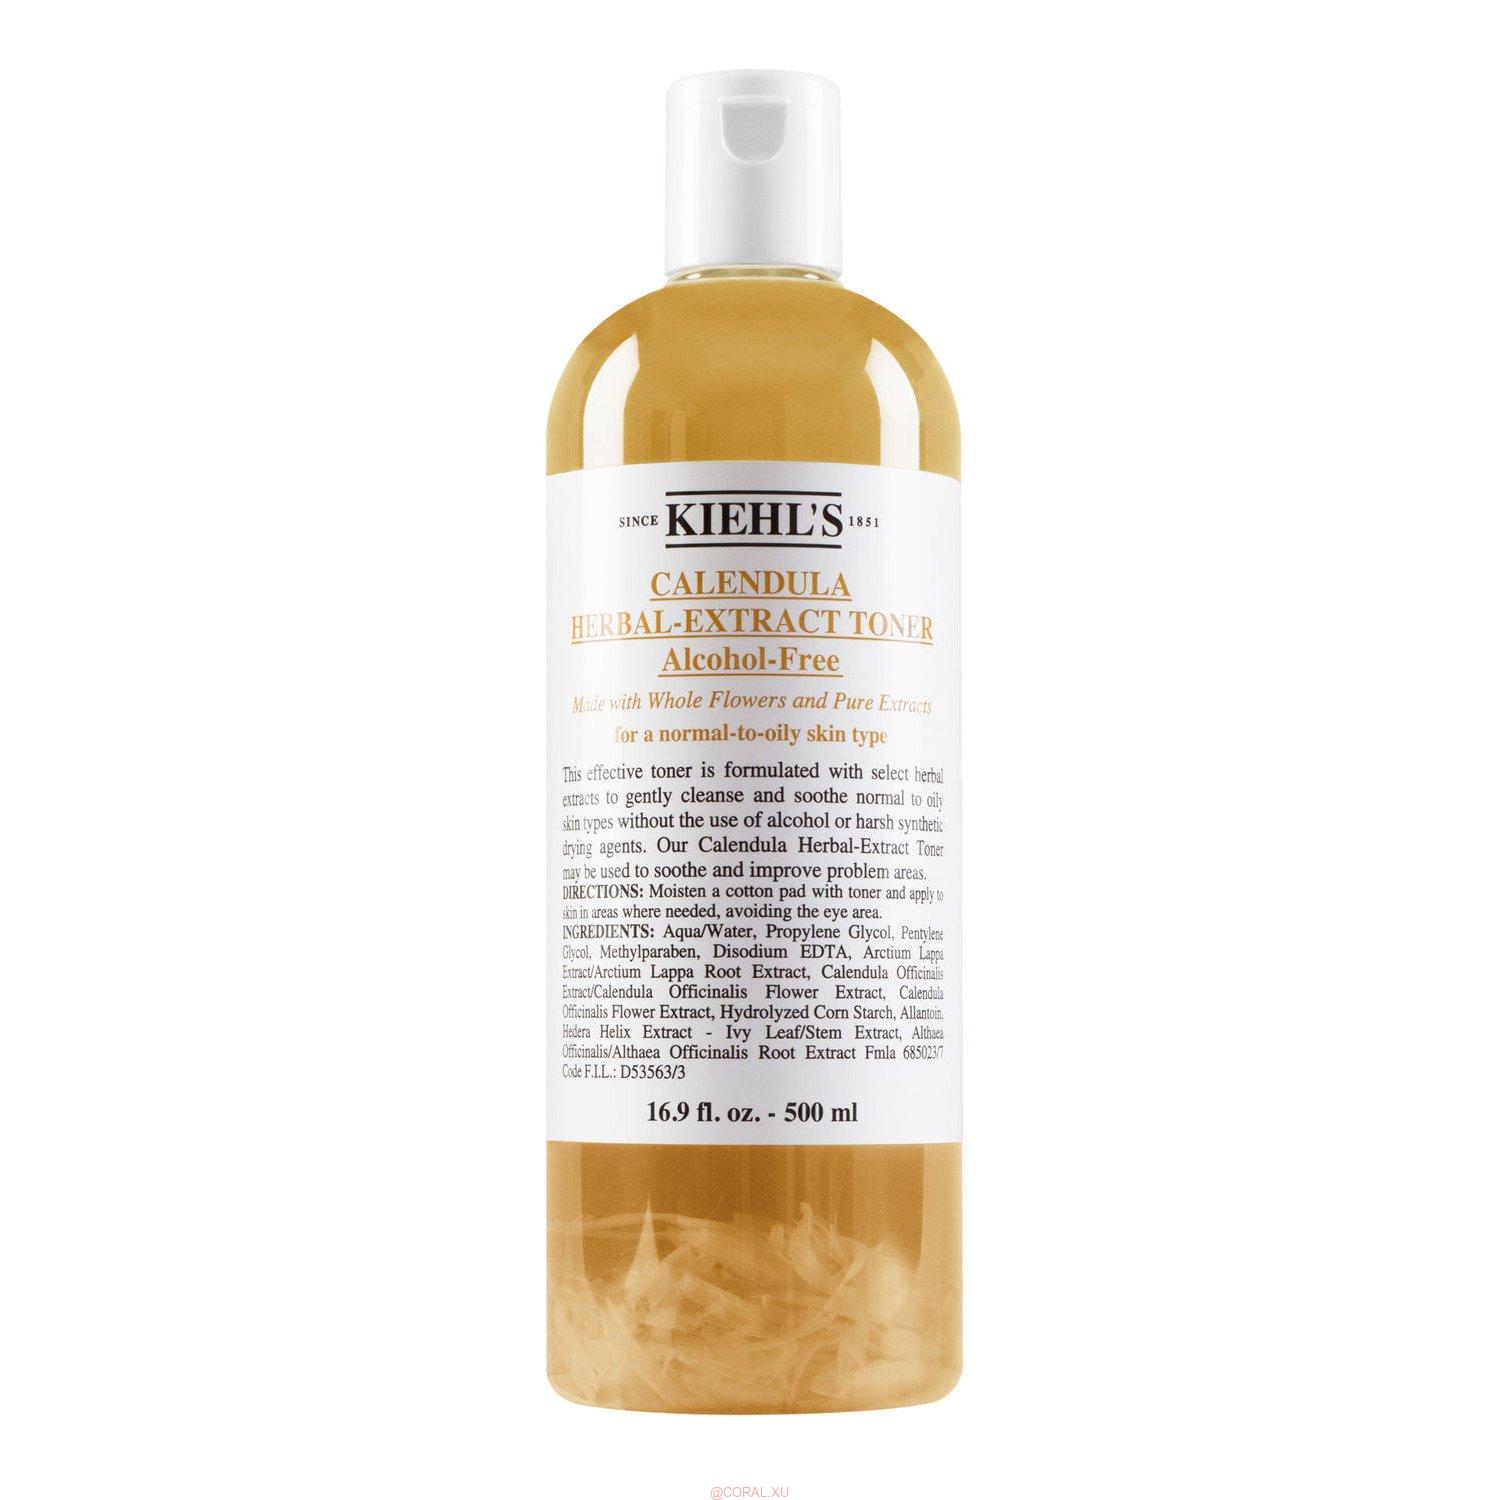 00002305 - Kiehl’s Calendula Herbal-Extract Alcohol-Free Toner Review